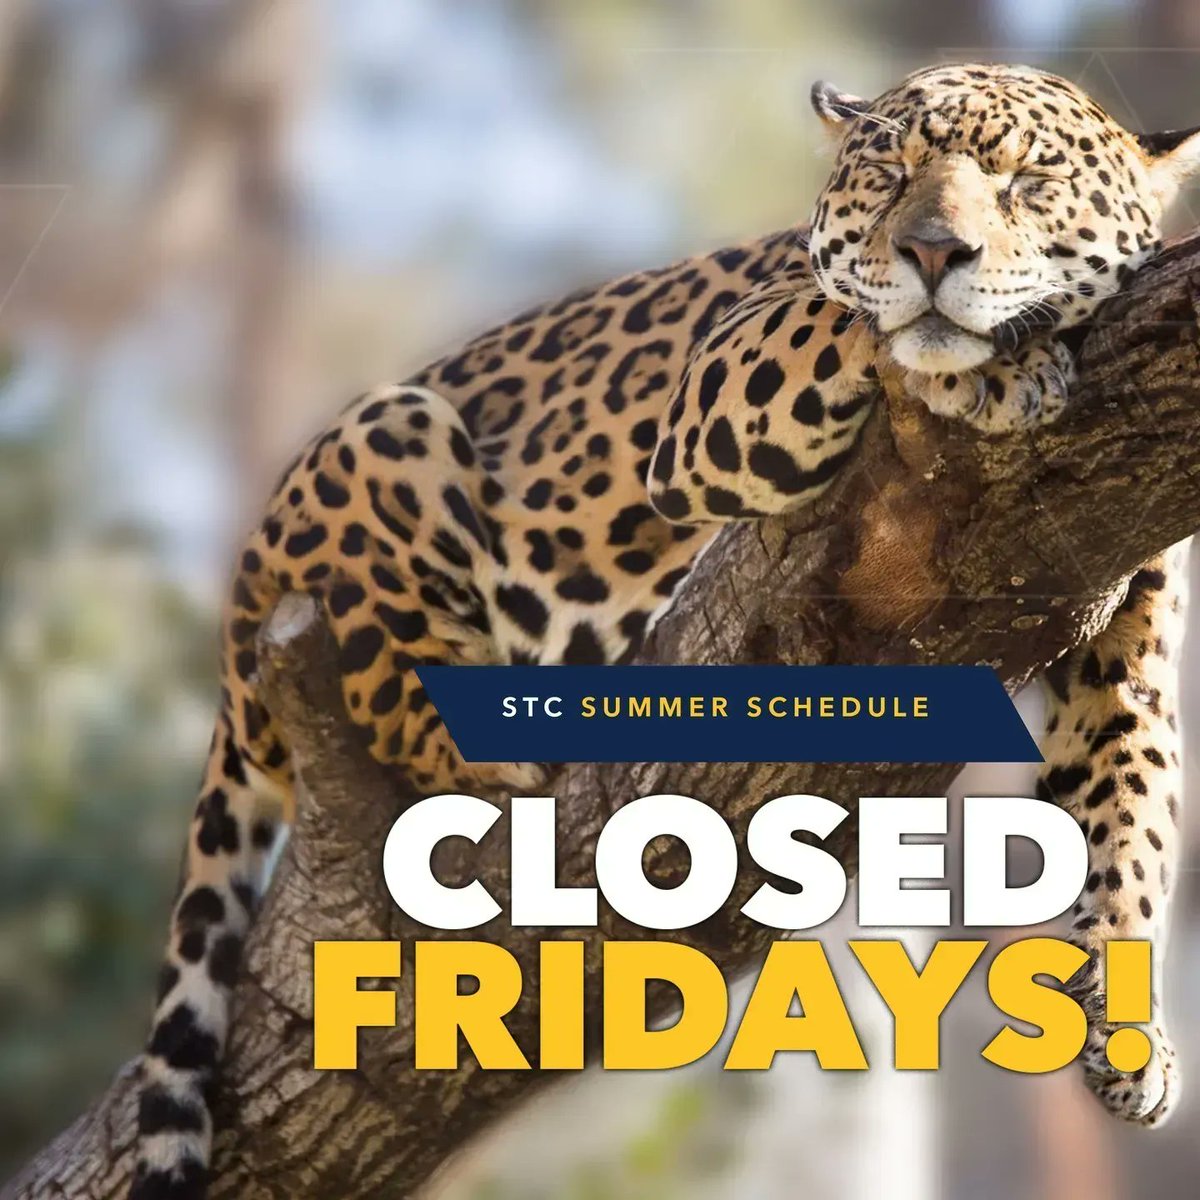 Hi there, Jaguars!
Just a reminder..., every Friday this summer, STC will be closed. 
See you on Monday!

#STCcares #STCcommunity #STCfamily #STCpride #STCjaguars